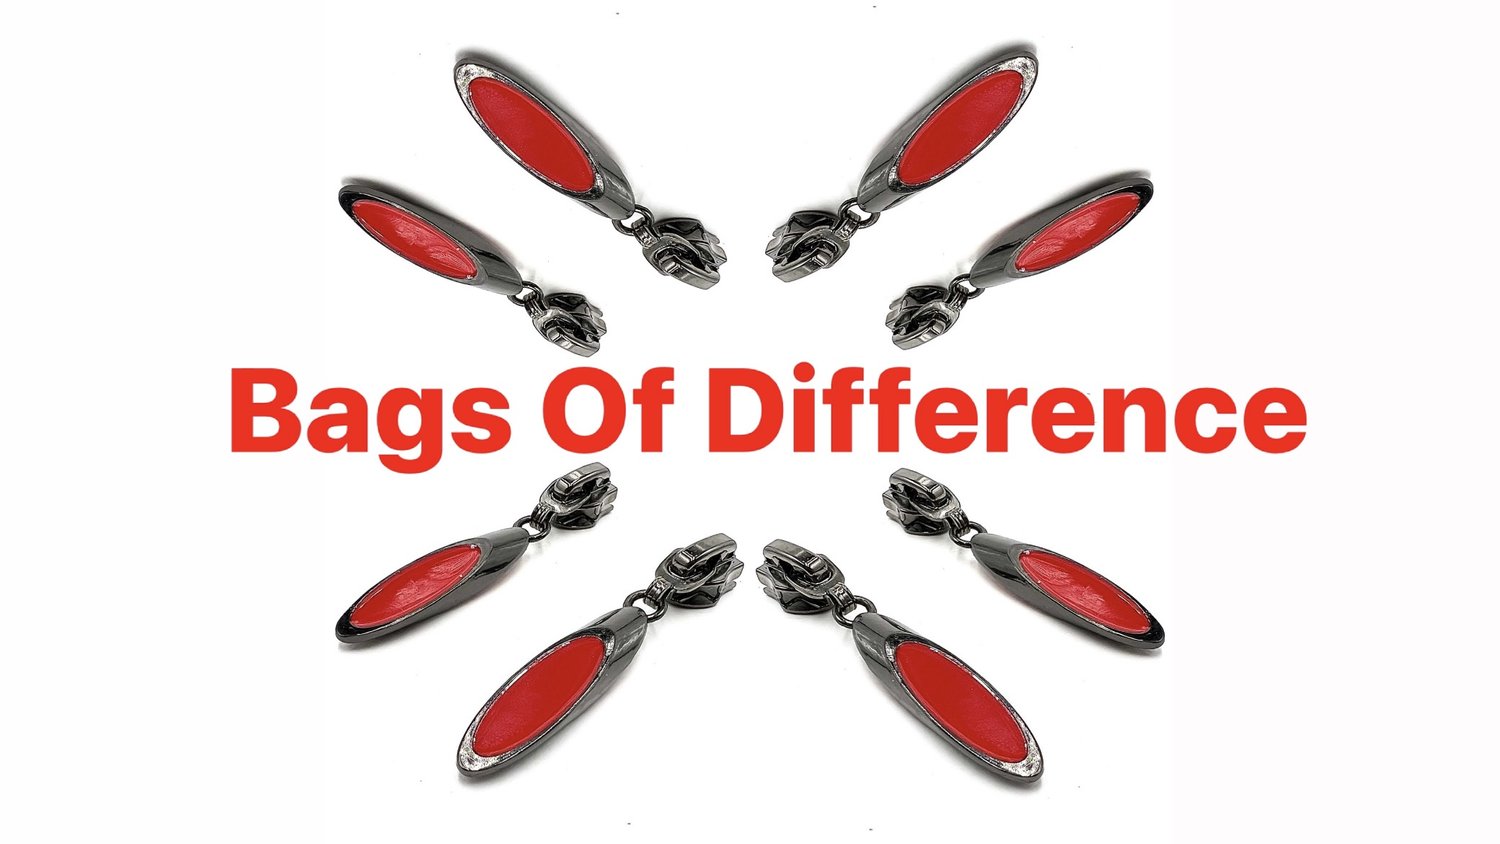 Bags of Difference